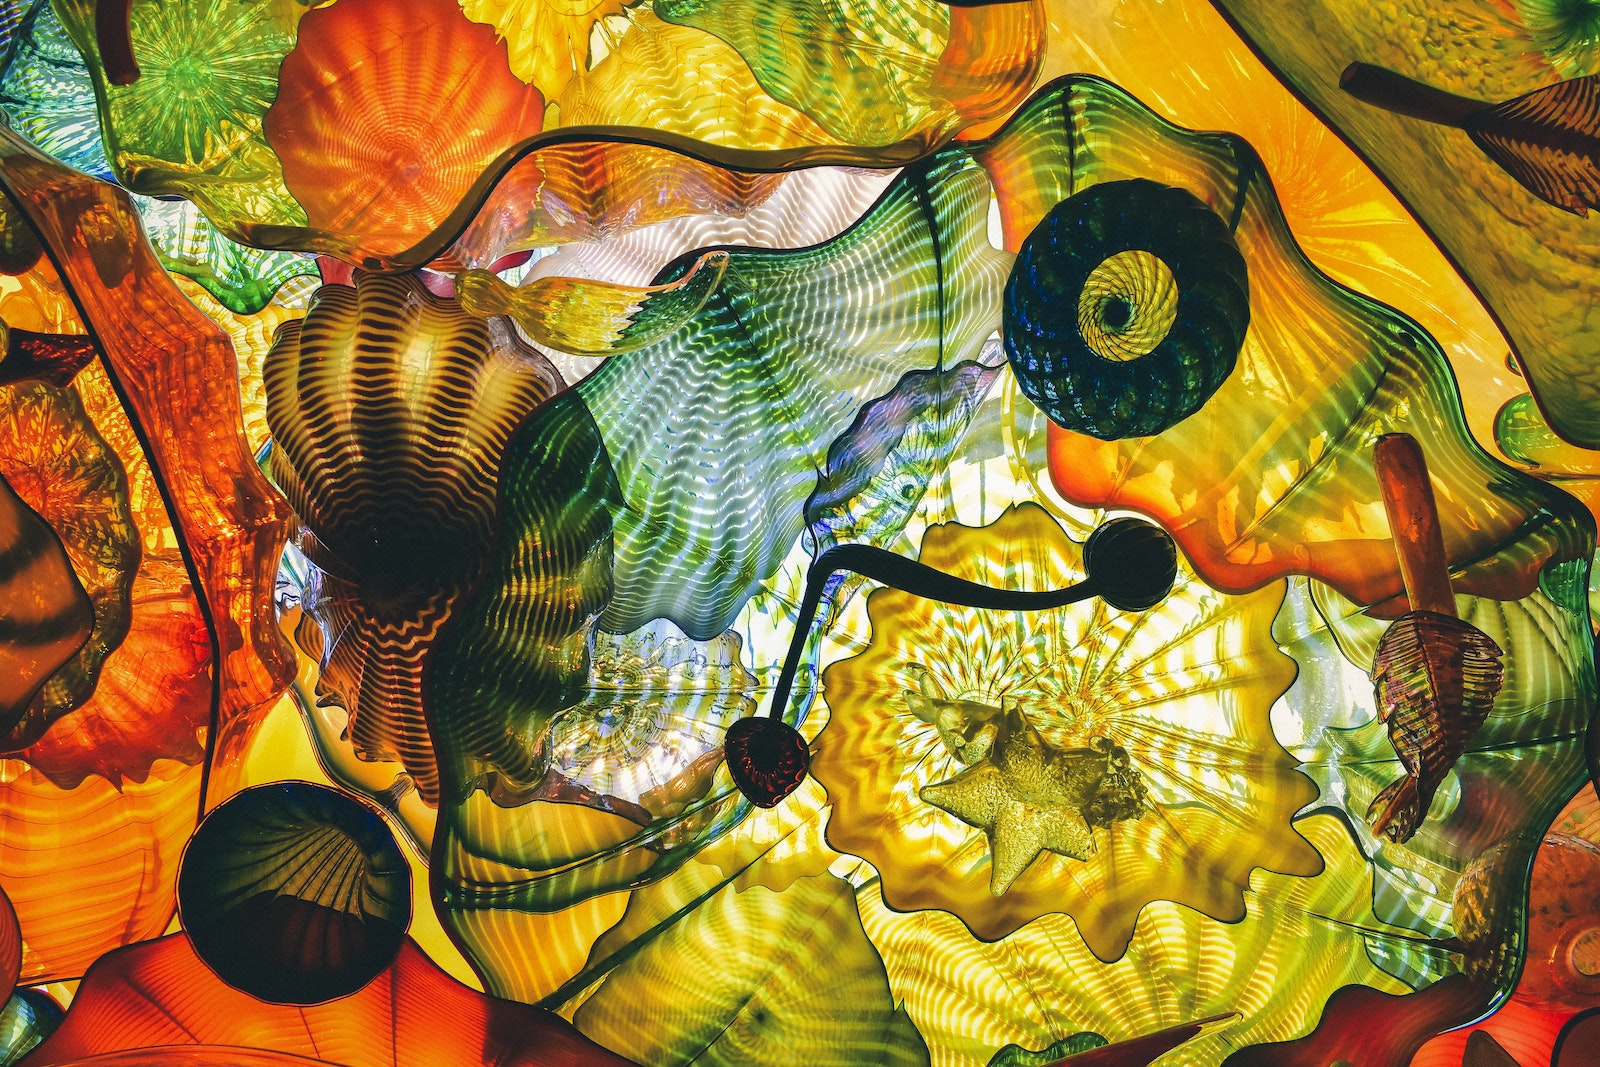 Glass Artwork In The Chihuly Garden And Glass Museum